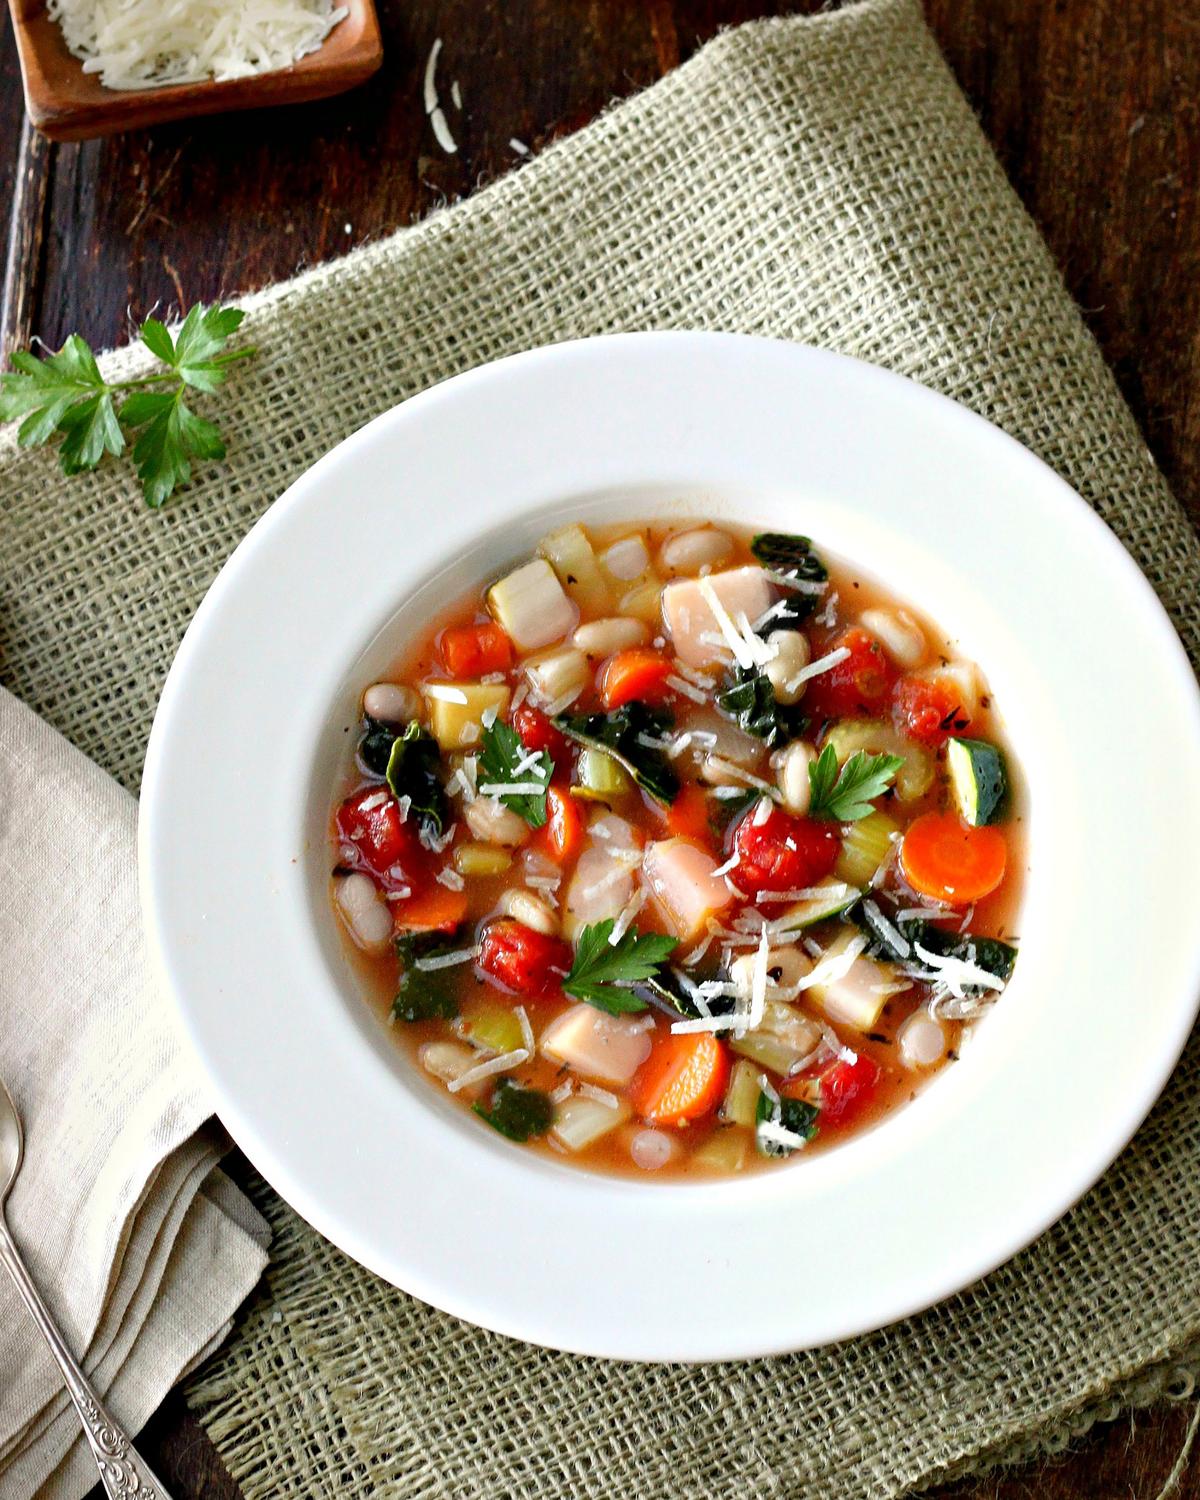 A bright tomato-based broth and hearty white beans are staples of this adaptable recipe. (Lynda Balslev for Tastefood)